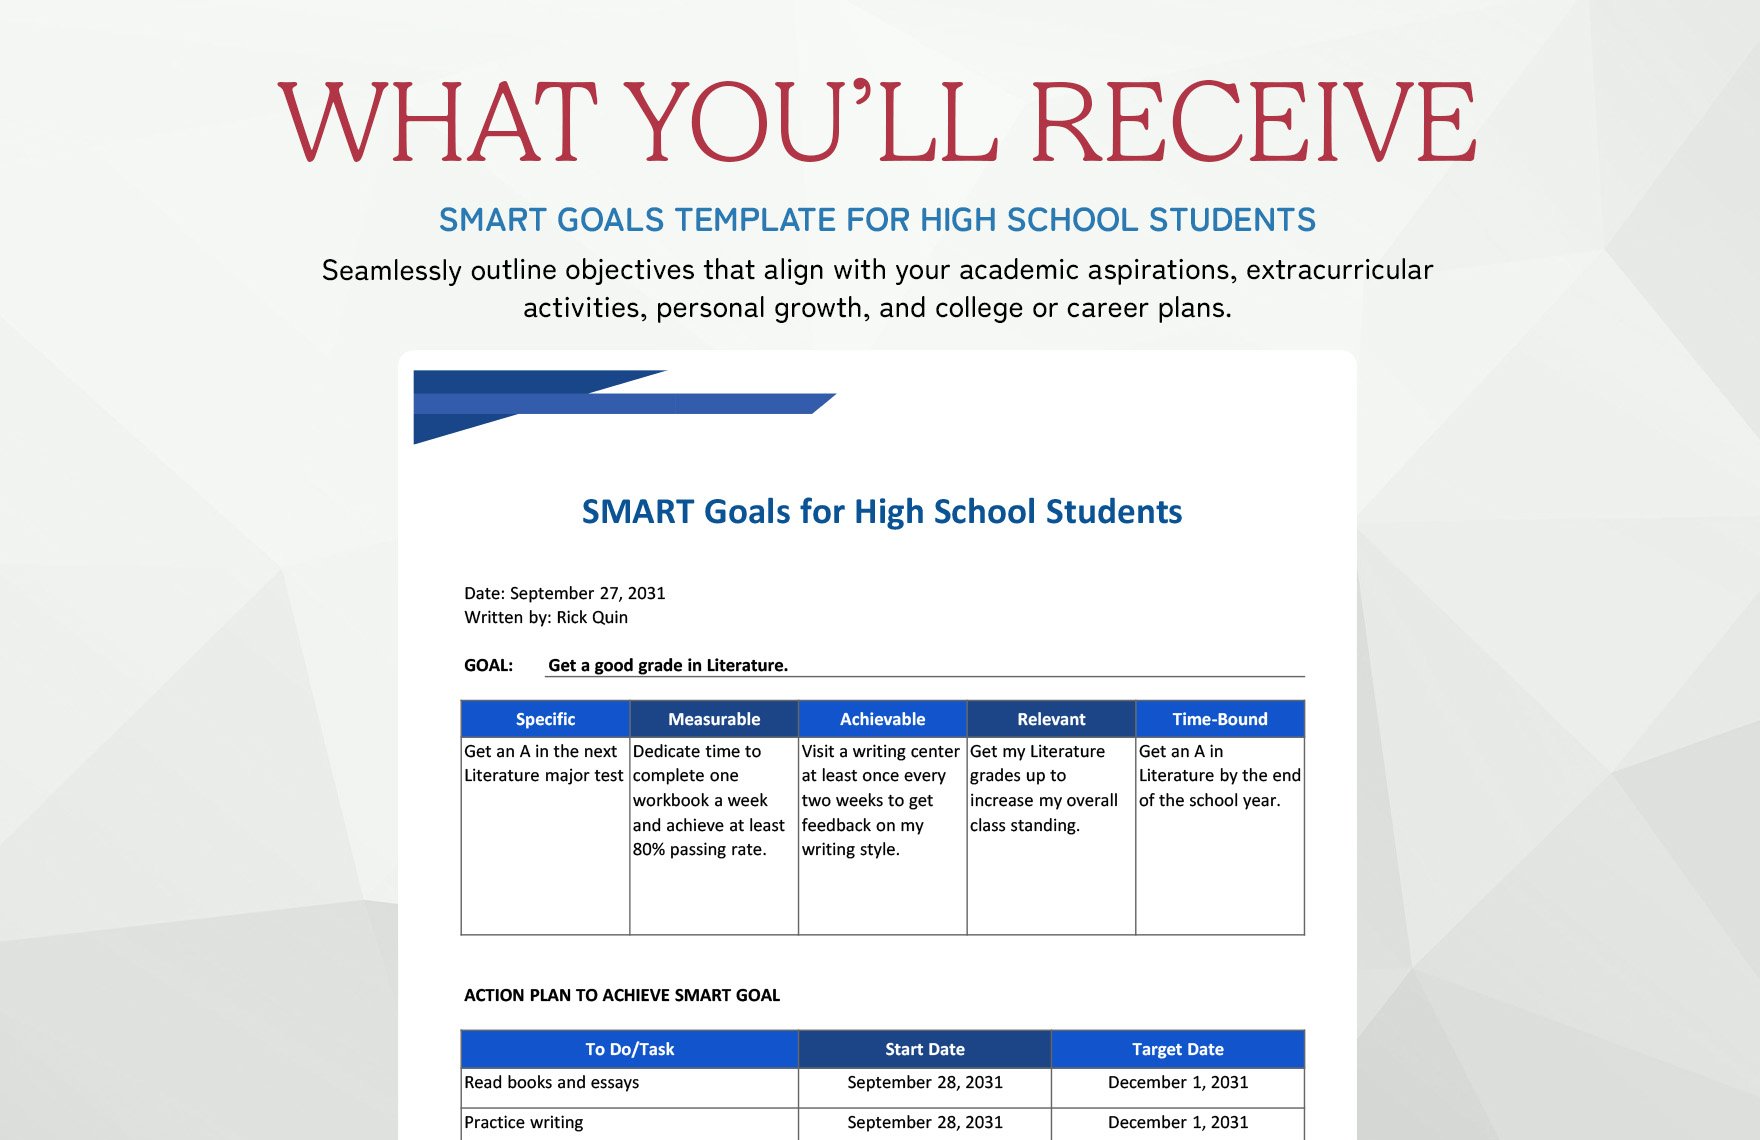 Smart Goals Template for High School Students